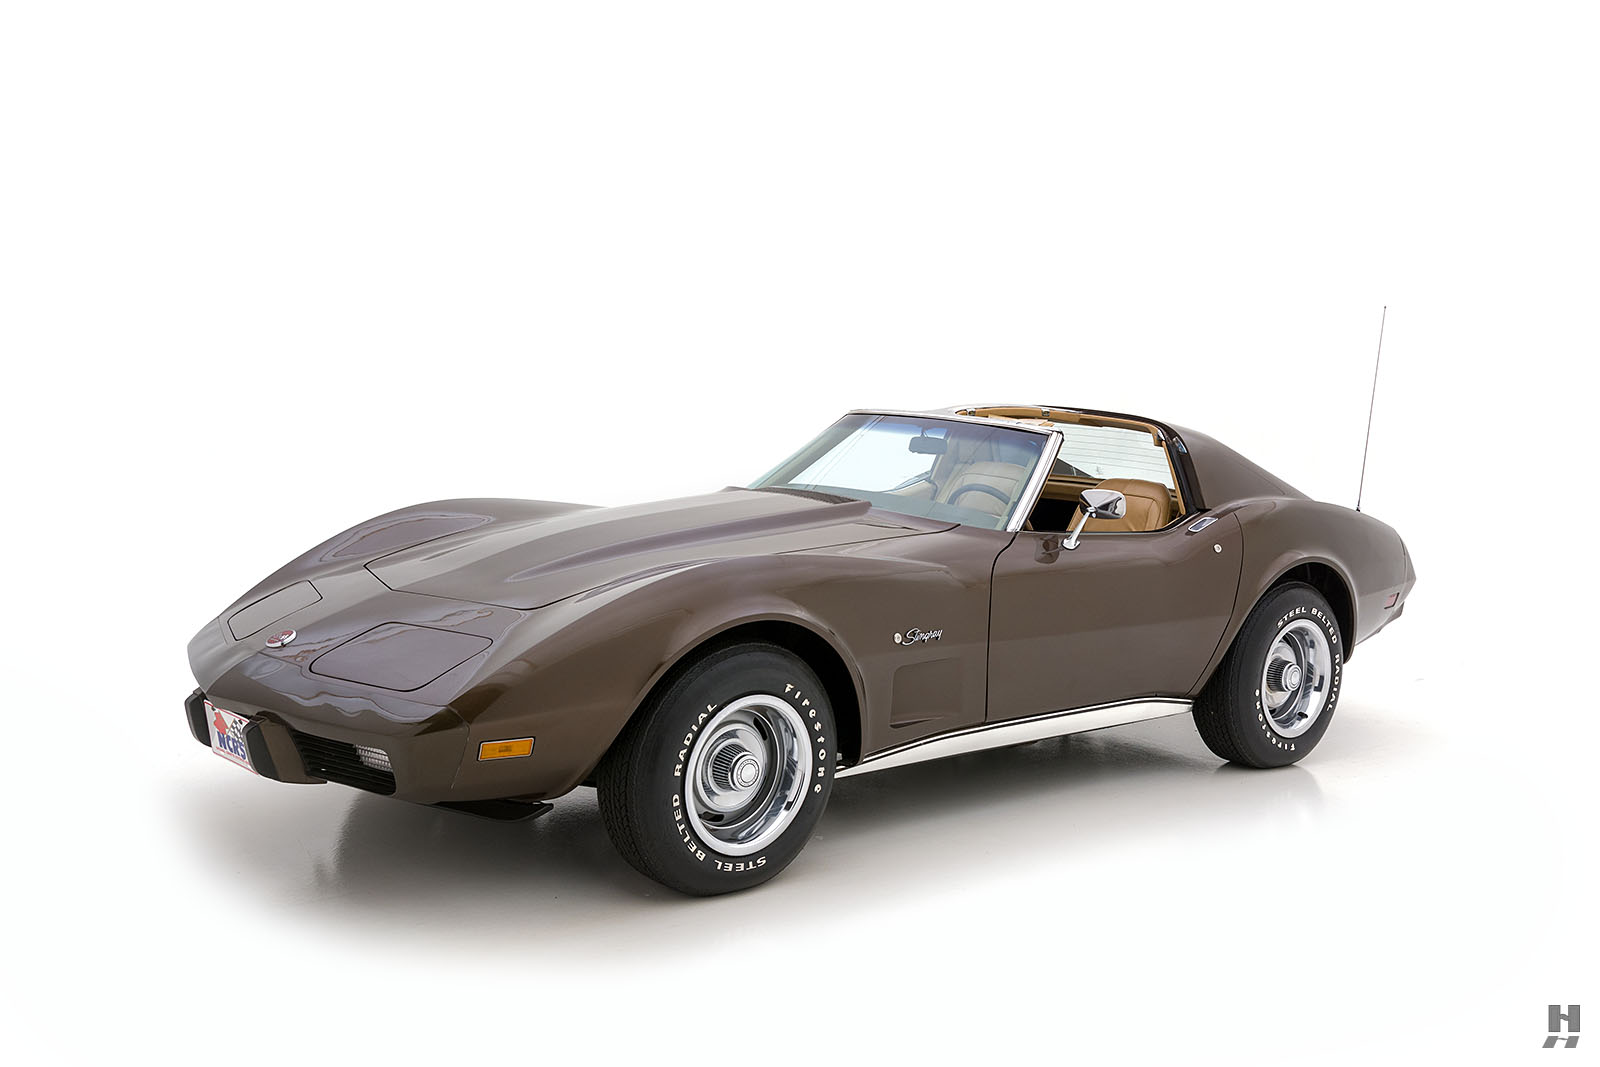 1978 Chevrolet Corvette Silver Anniversary | Hagerty Valuation Tools